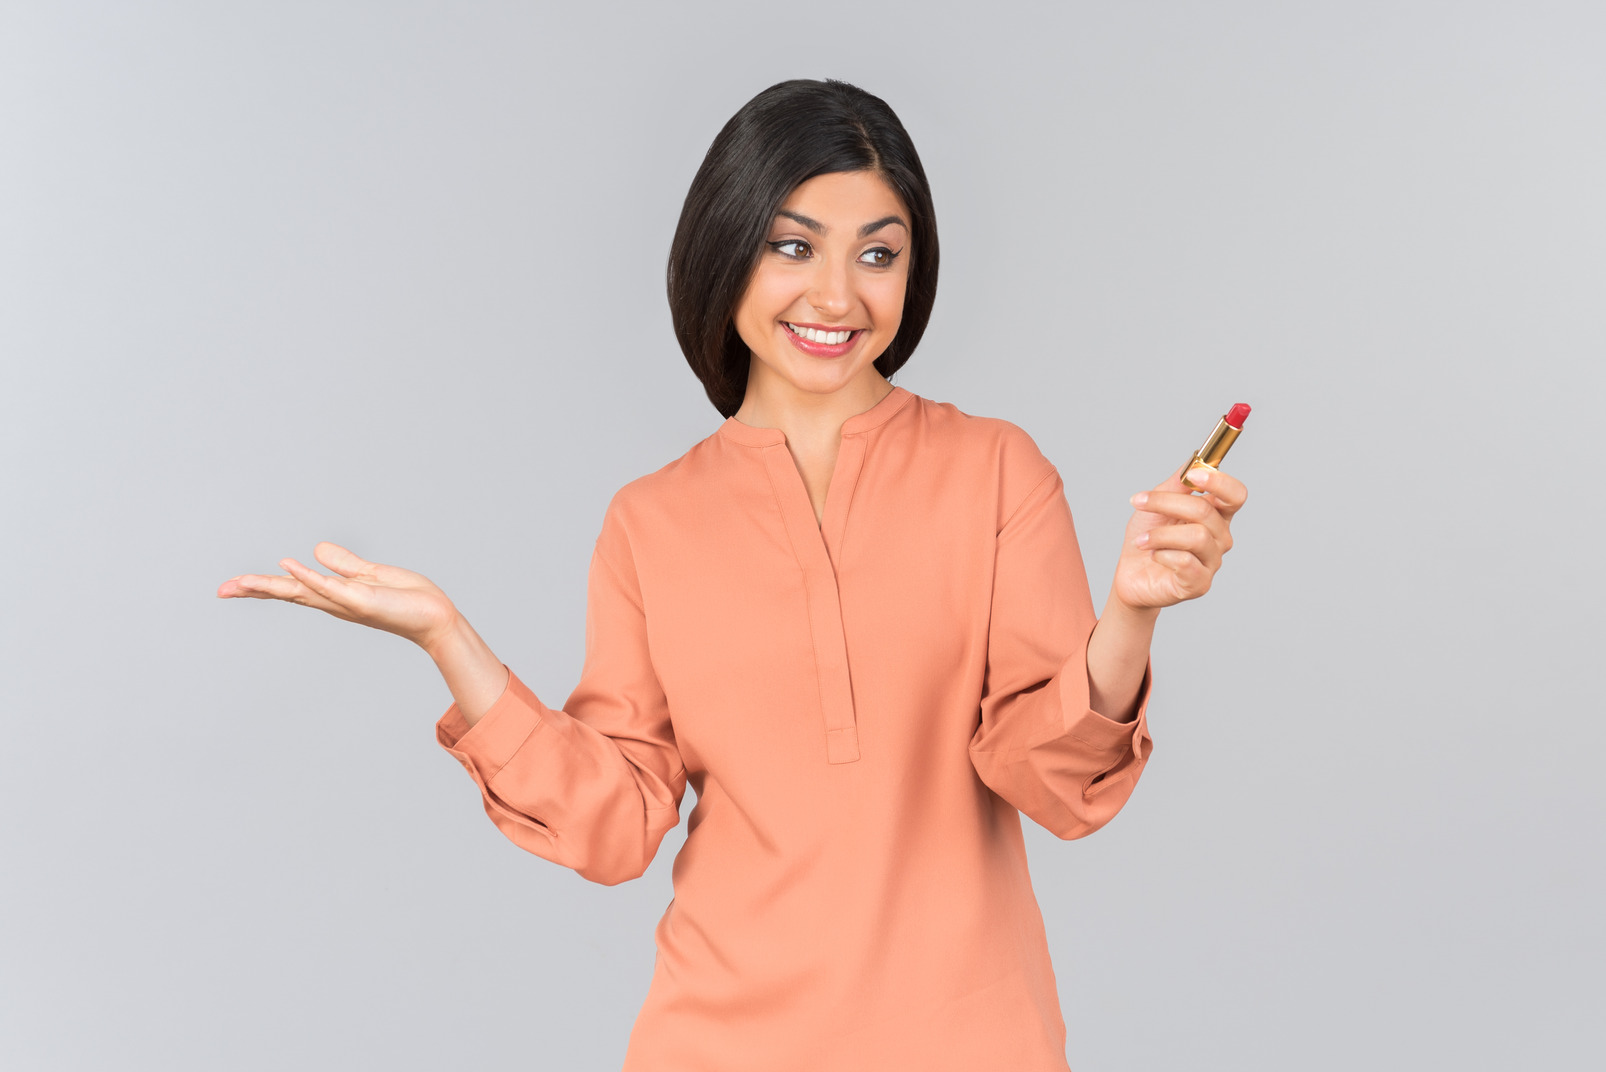 Indian woman in orange top wearing lipstick and holding one